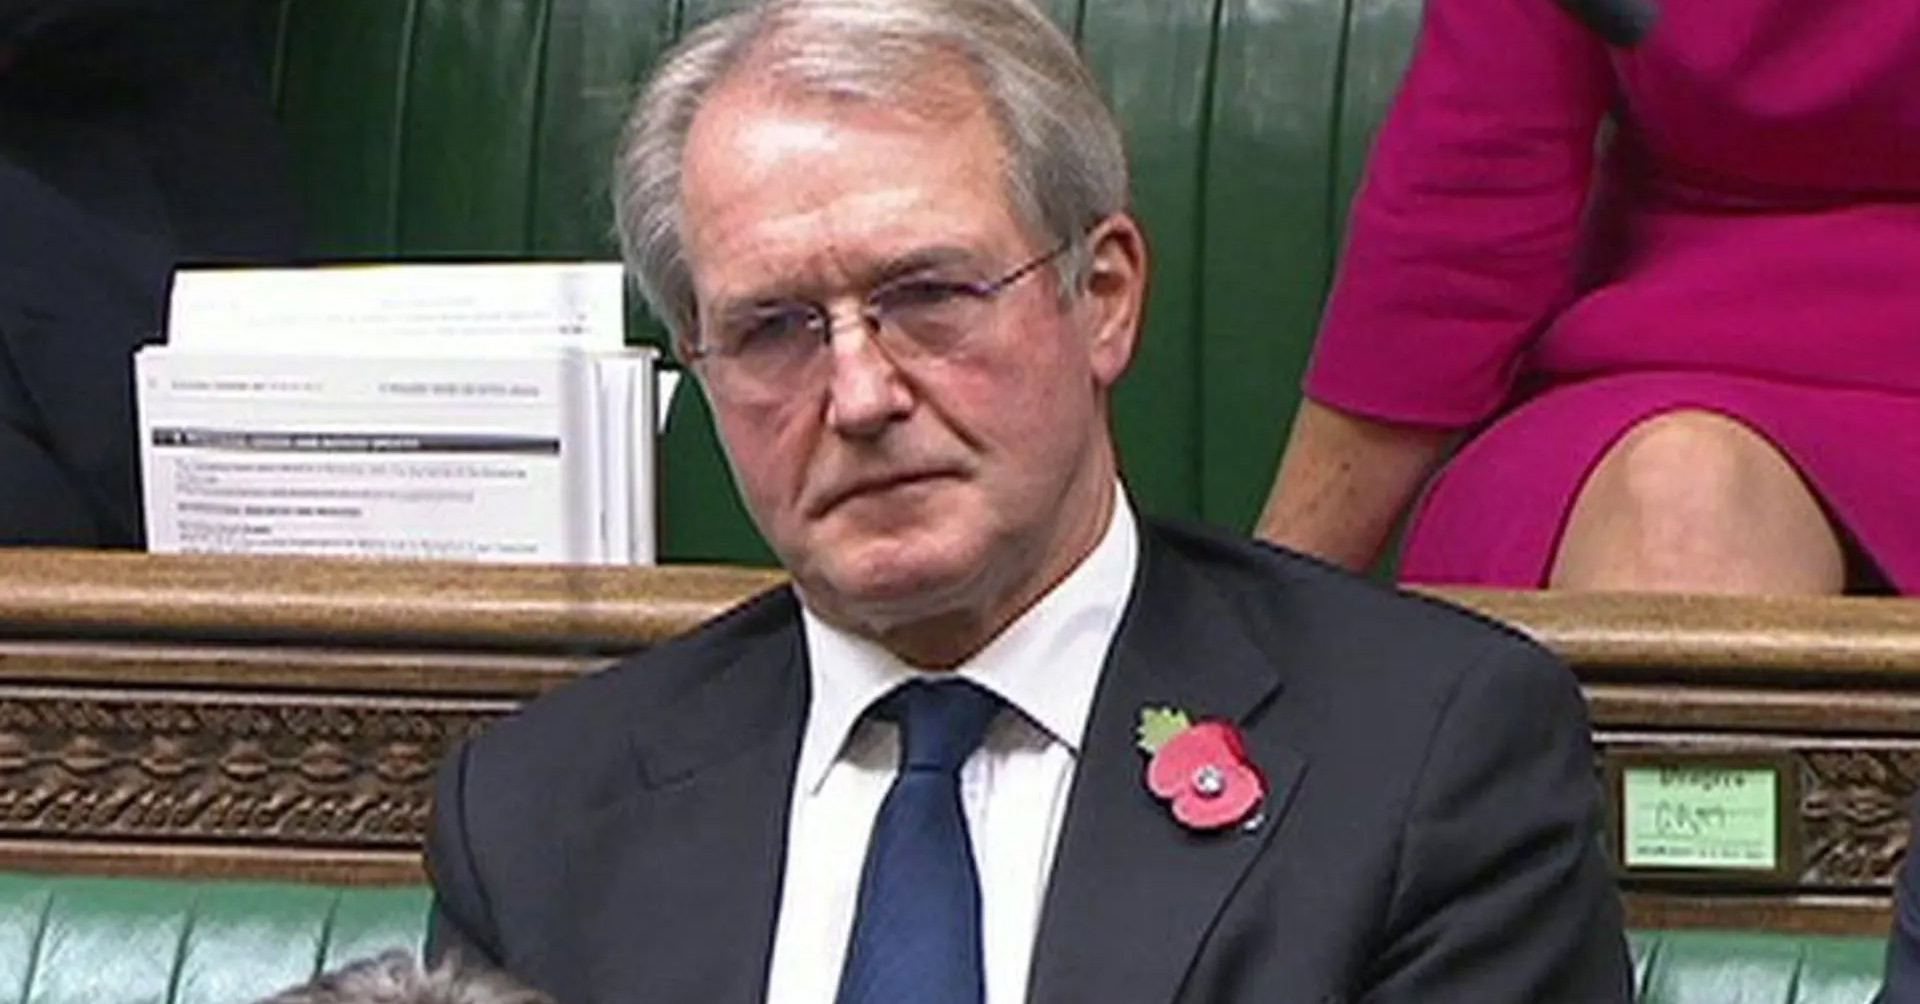 Owen Paterson in House of Commons debate to suspend him